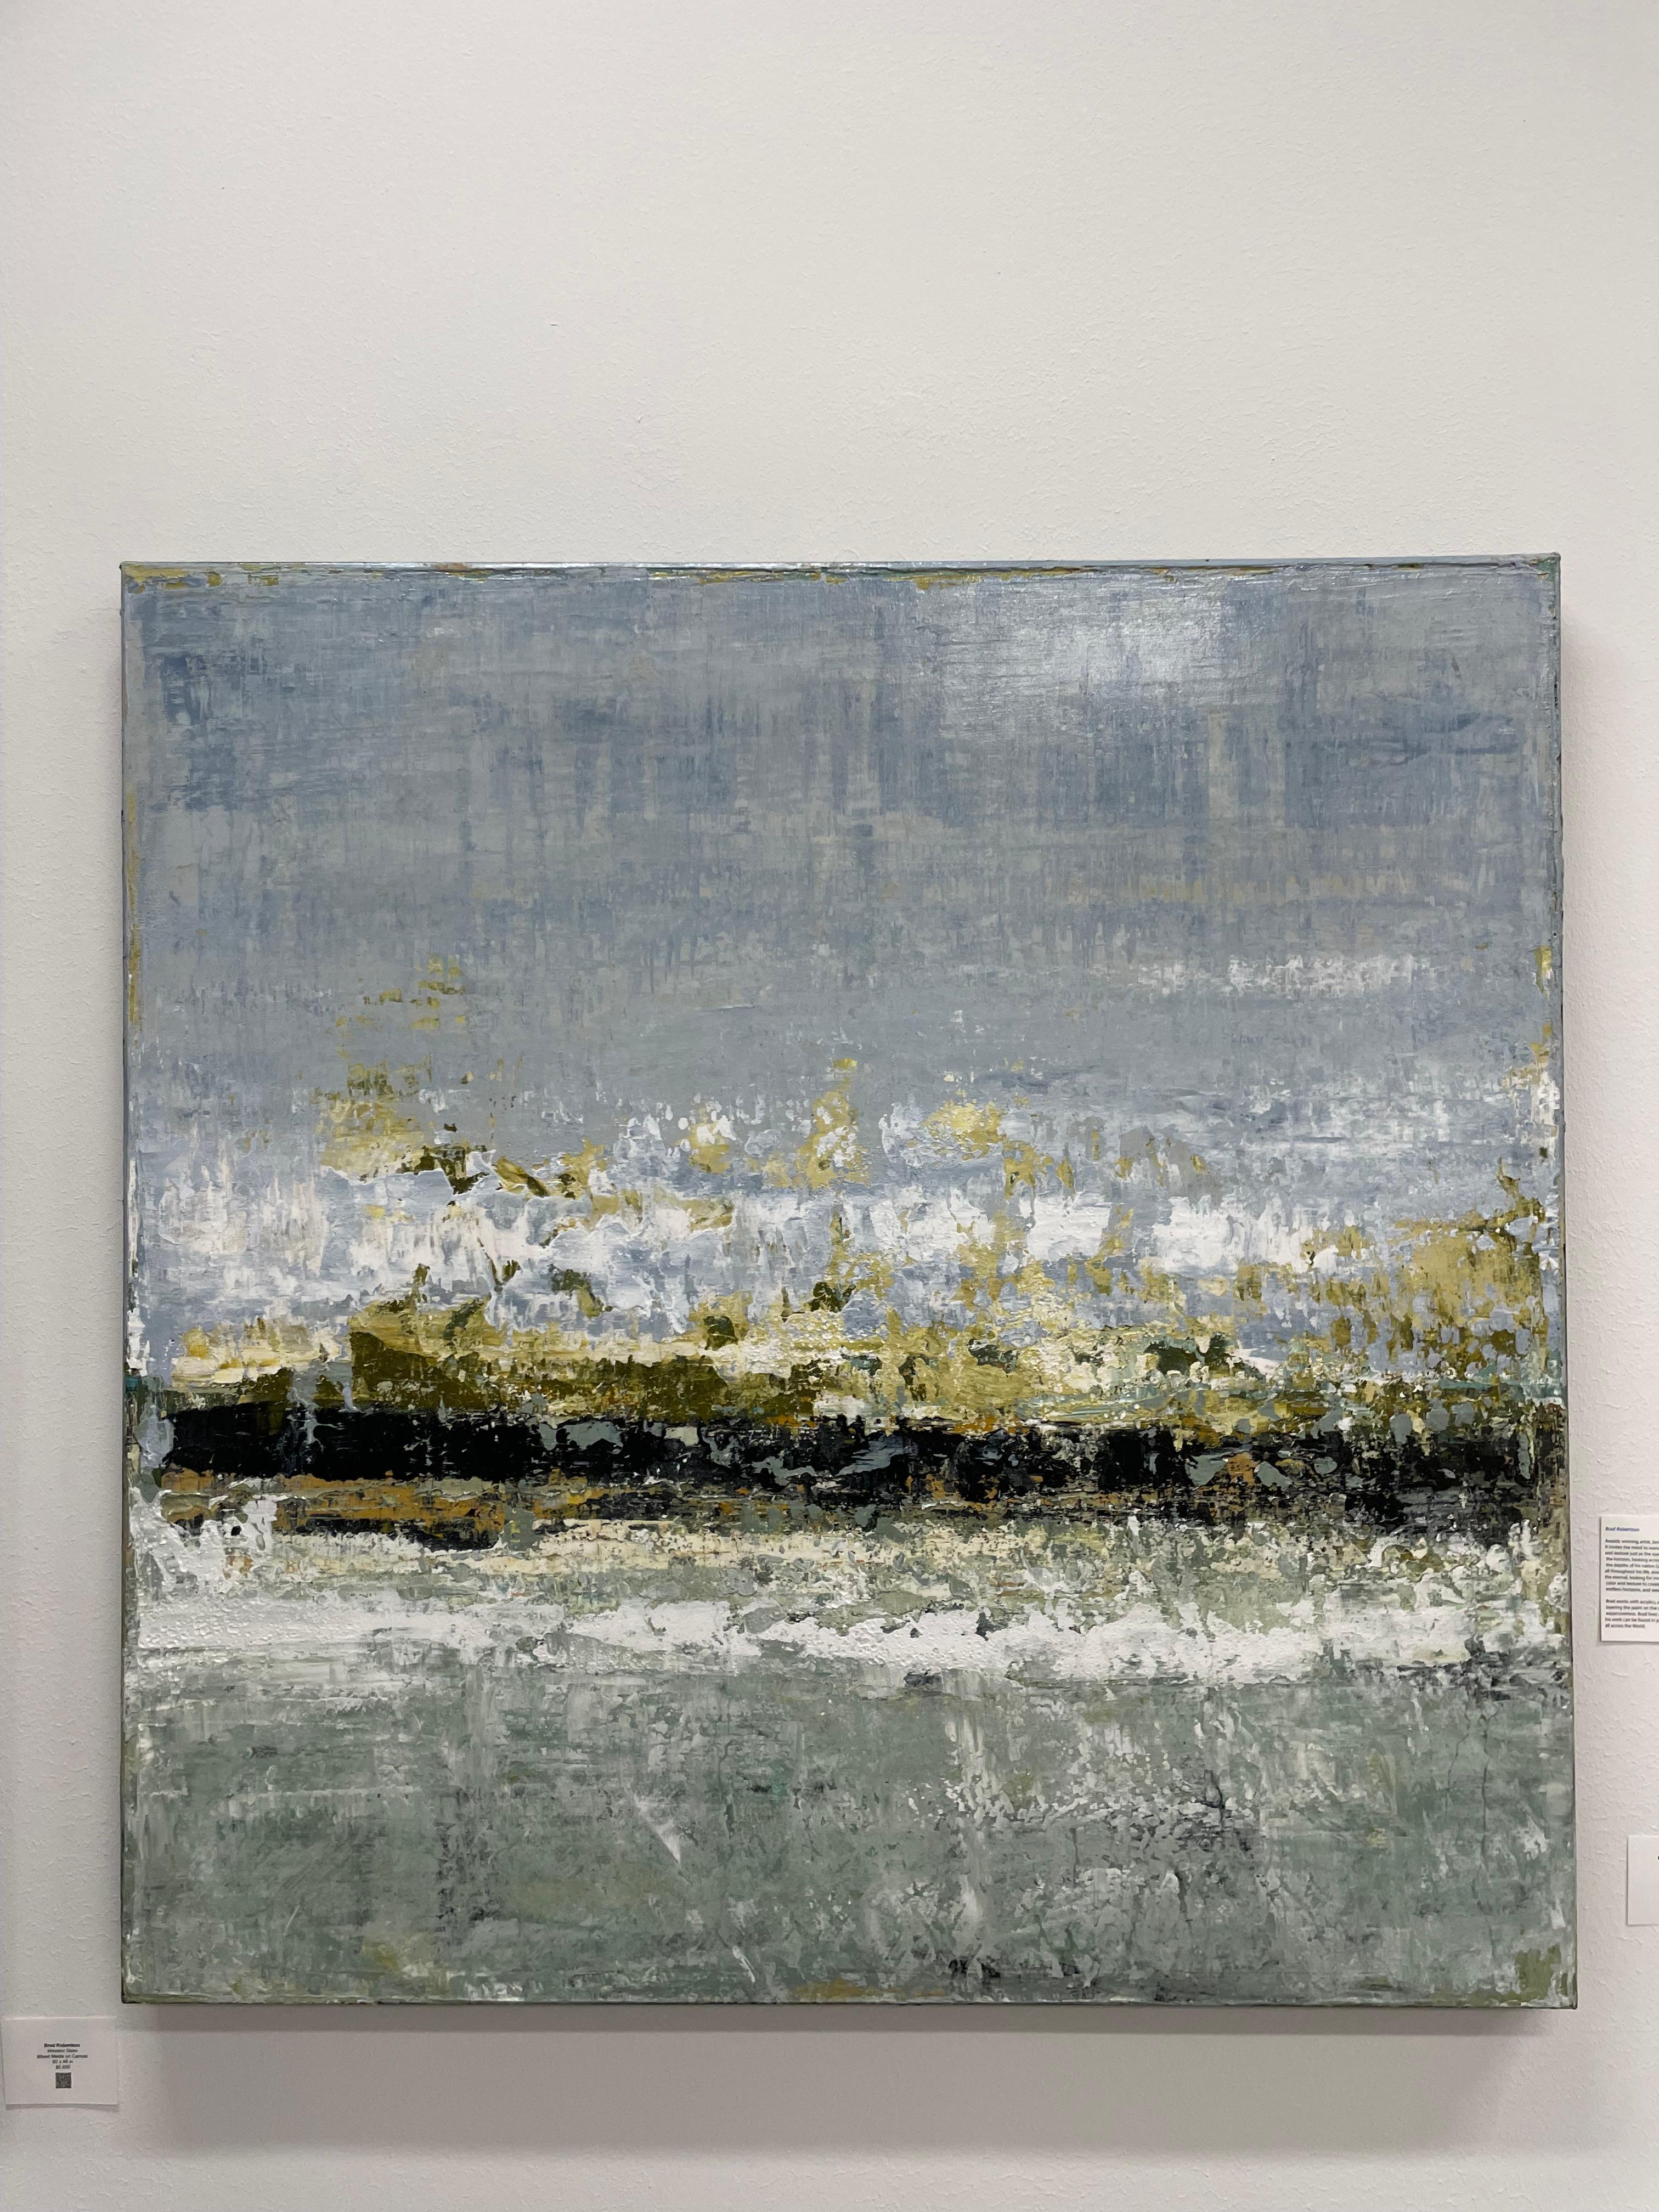 The abstract piece by Brad Robertson is made with mixed media on canvas and the piece is 48 x 48 inches, priced at $5,000. Robertson was born and raised in a coastal town, which inspires his paintings. The coastal landscapes are his biggest